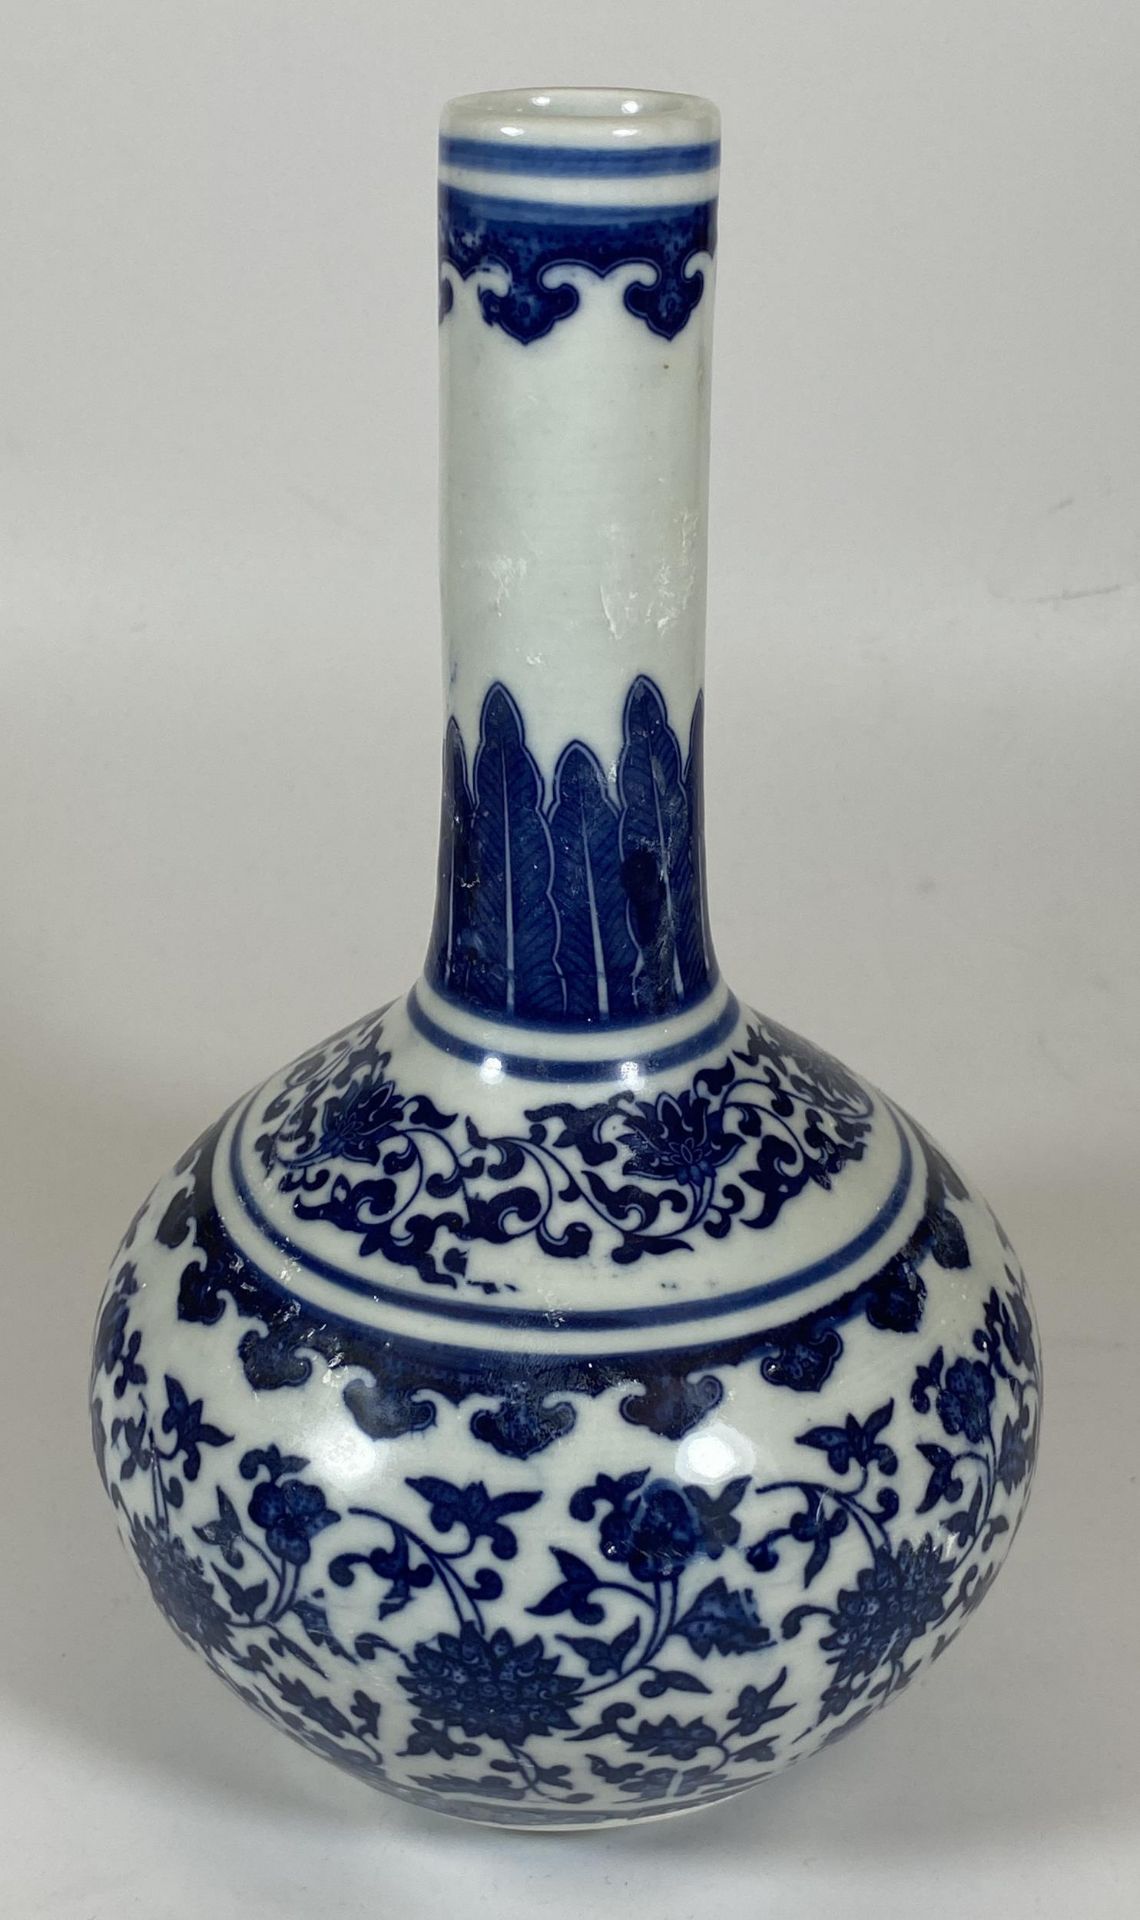 A QING STYLE CHINESE BLUE AND WHITE FLORAL BOTTLE VASE, QIANLONG MARK TO BASE, HEIGHT 23CM